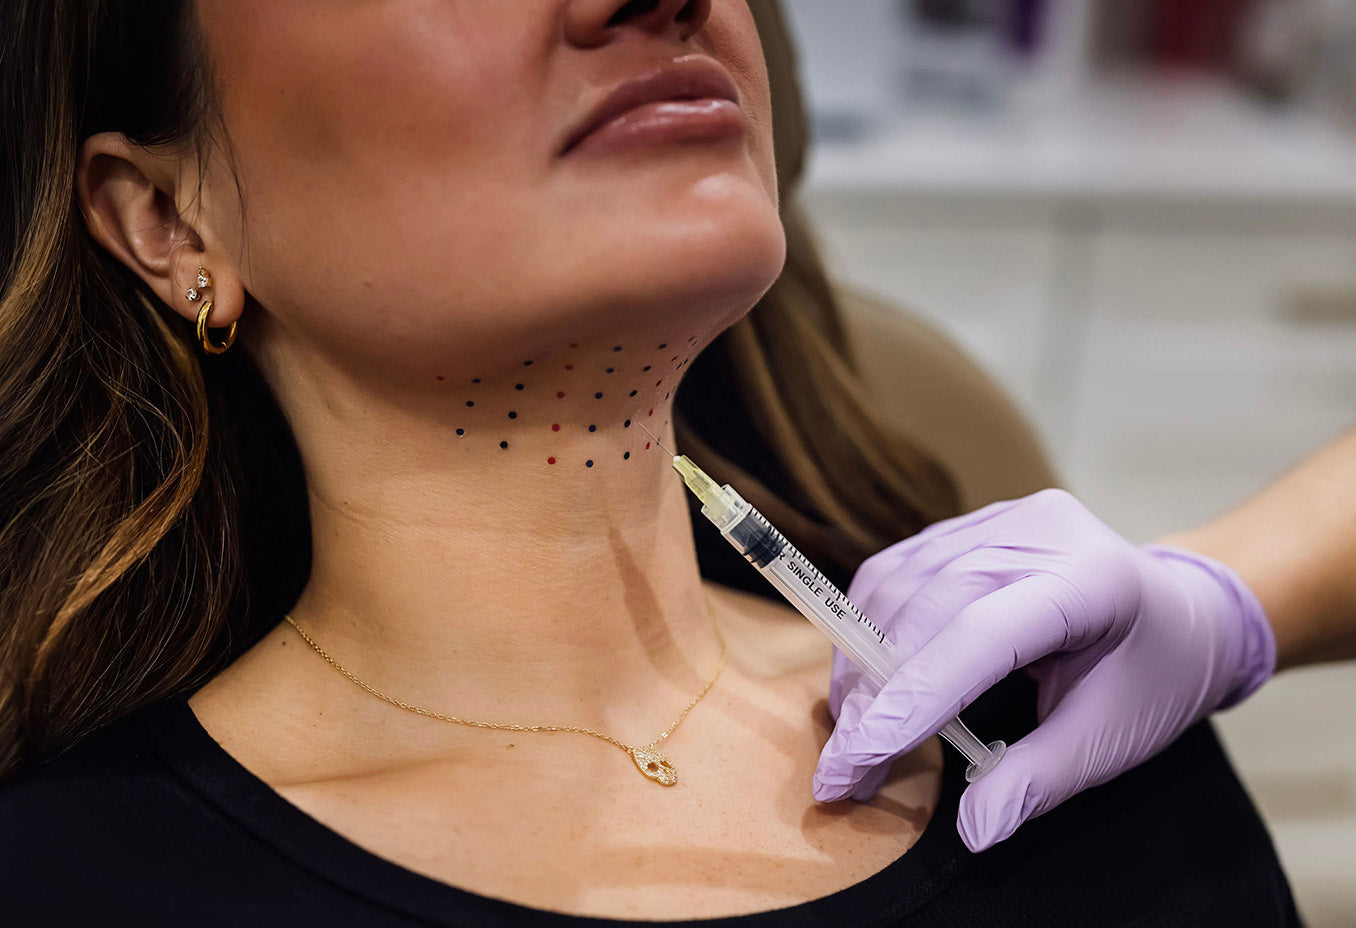 kybella double chin dissolving injections at skin design aesthetics pembroke, ma